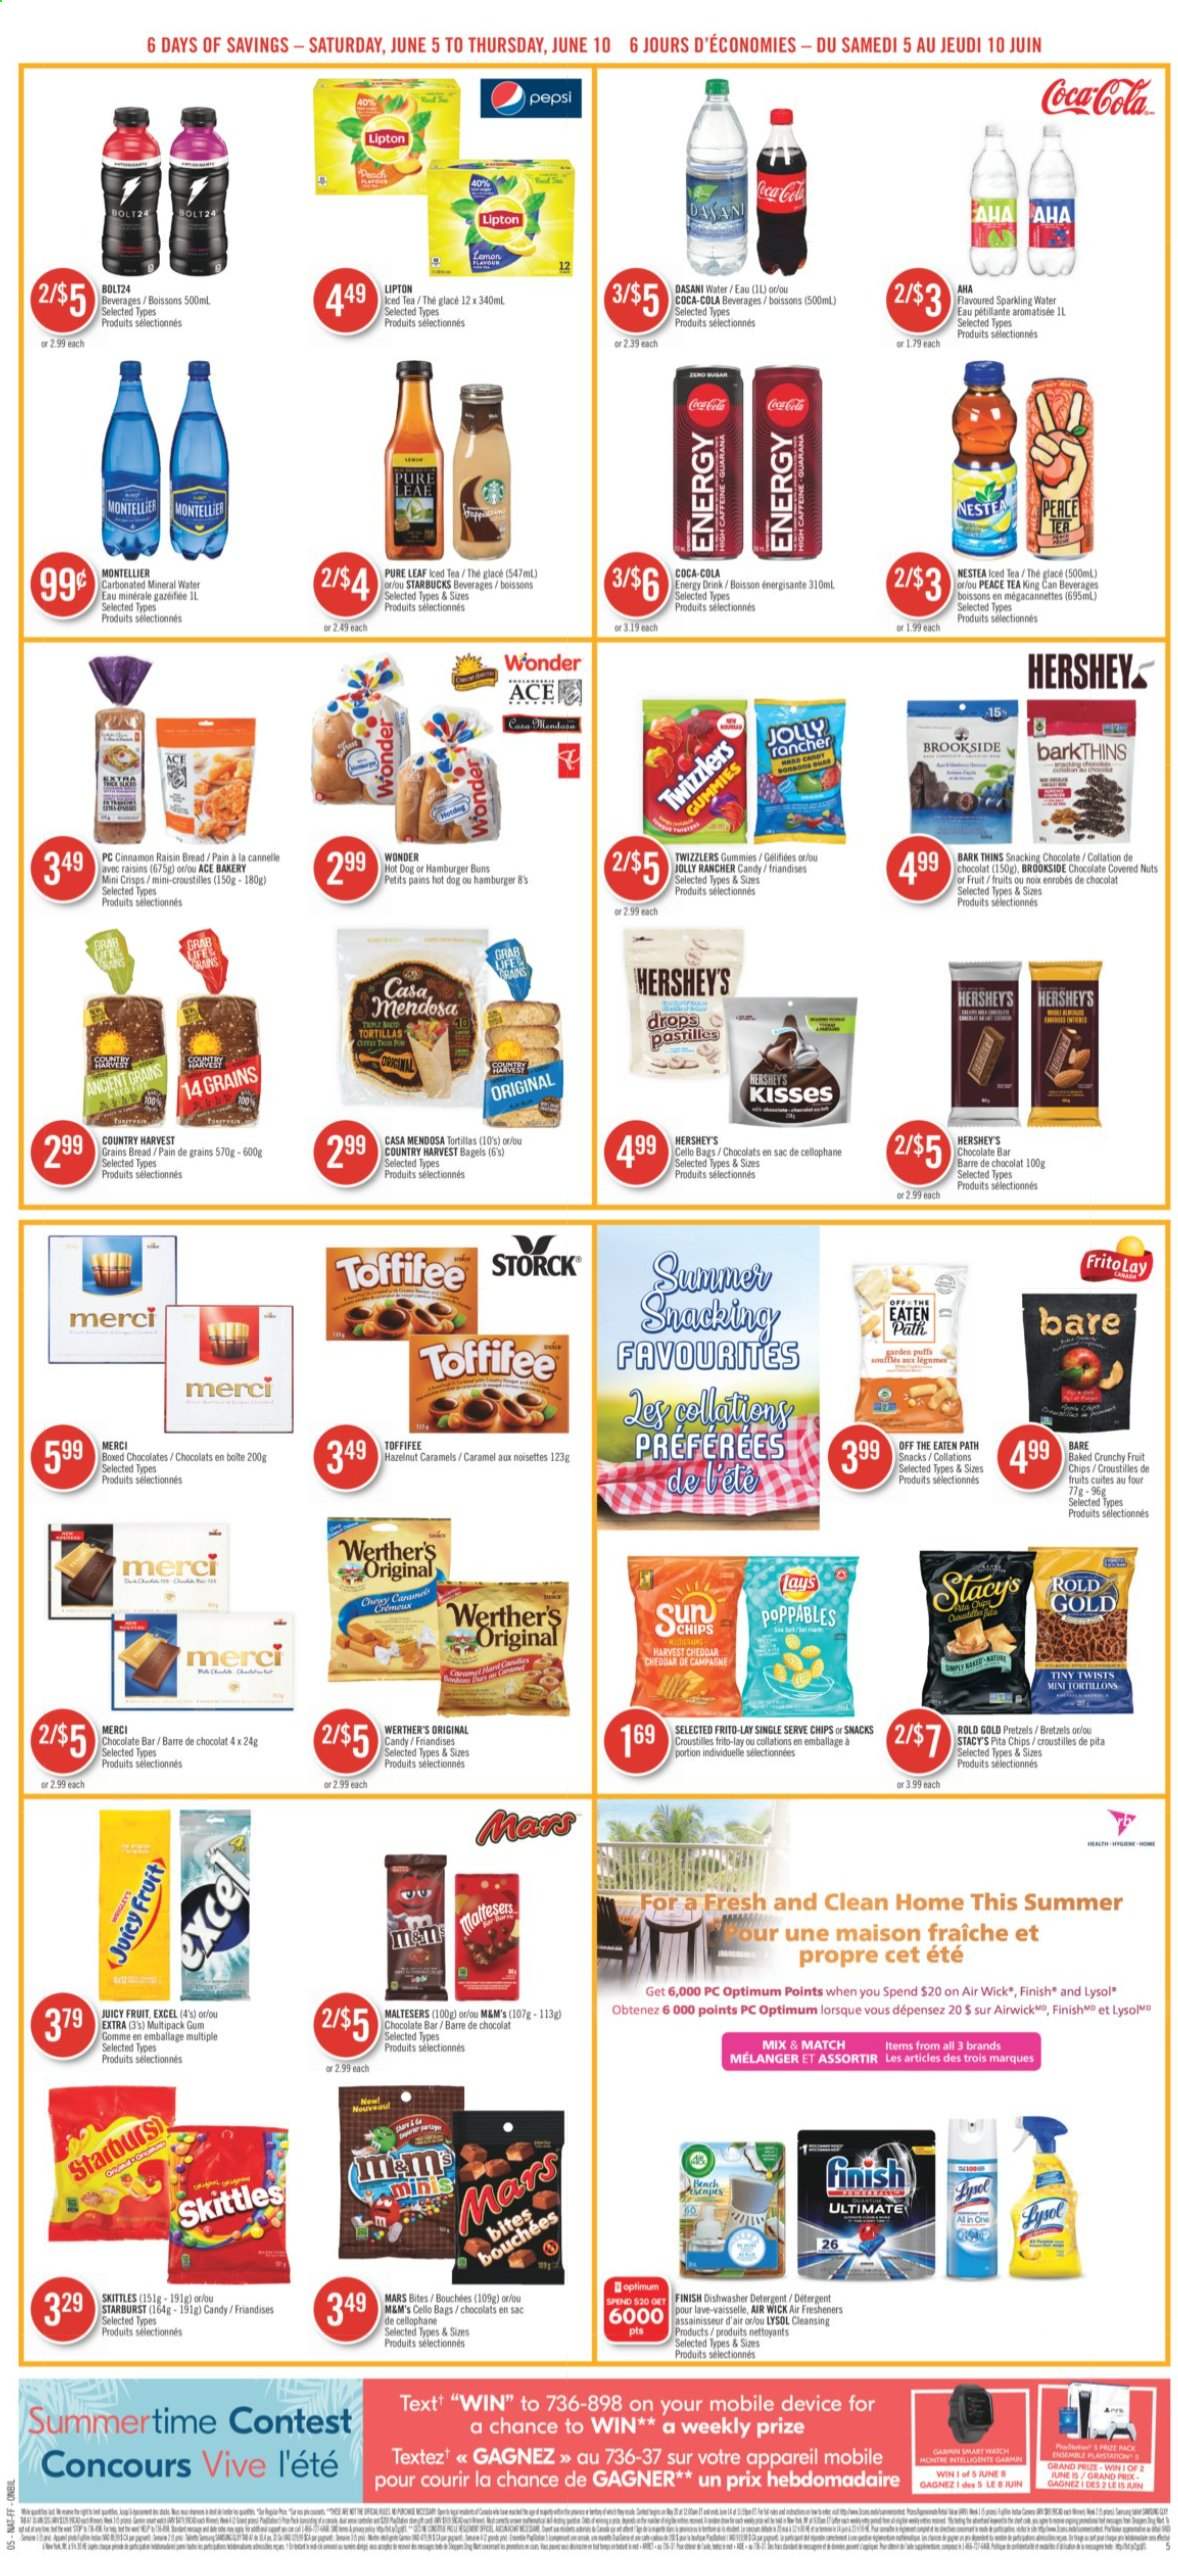 thumbnail - Shoppers Drug Mart Flyer - June 05, 2021 - June 10, 2021 - Sales products - pretzels, Mars, Hershey's, Maltesers, Merci, pastilles, Skittles, Starburst, chocolate bar, tortillas, Lay’s, Thins, Frito-Lay, ACE Bakery, pita chips, caramel, dried fruit, Coca-Cola, Pepsi, energy drink, ice tea, mineral water, sparkling water, Pure Leaf, Starbucks, Lysol, raisins, chips, M&M's. Page 11.